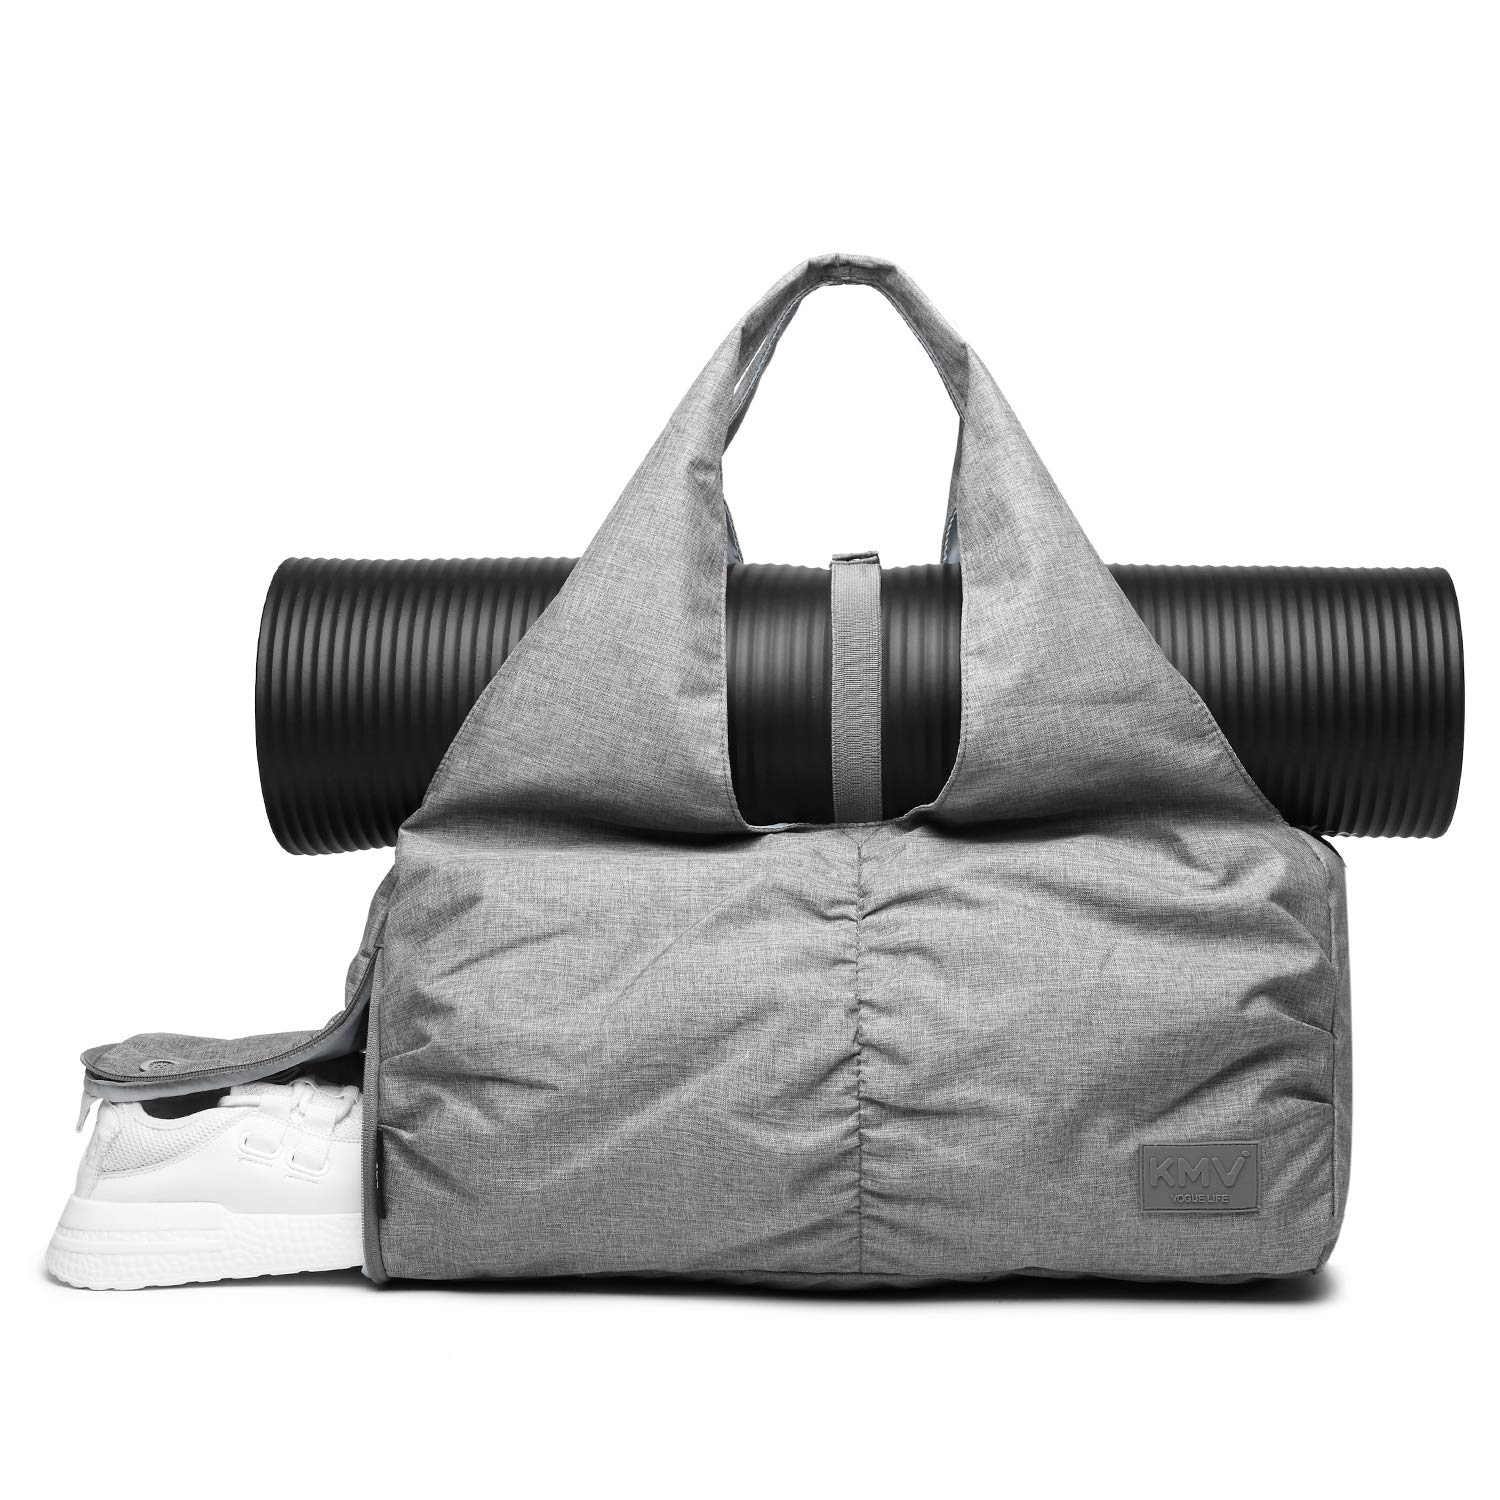 From Work to Workout: the Best Gym Bags with Shoe Compartments - Carryology  - Exploring better ways to carry